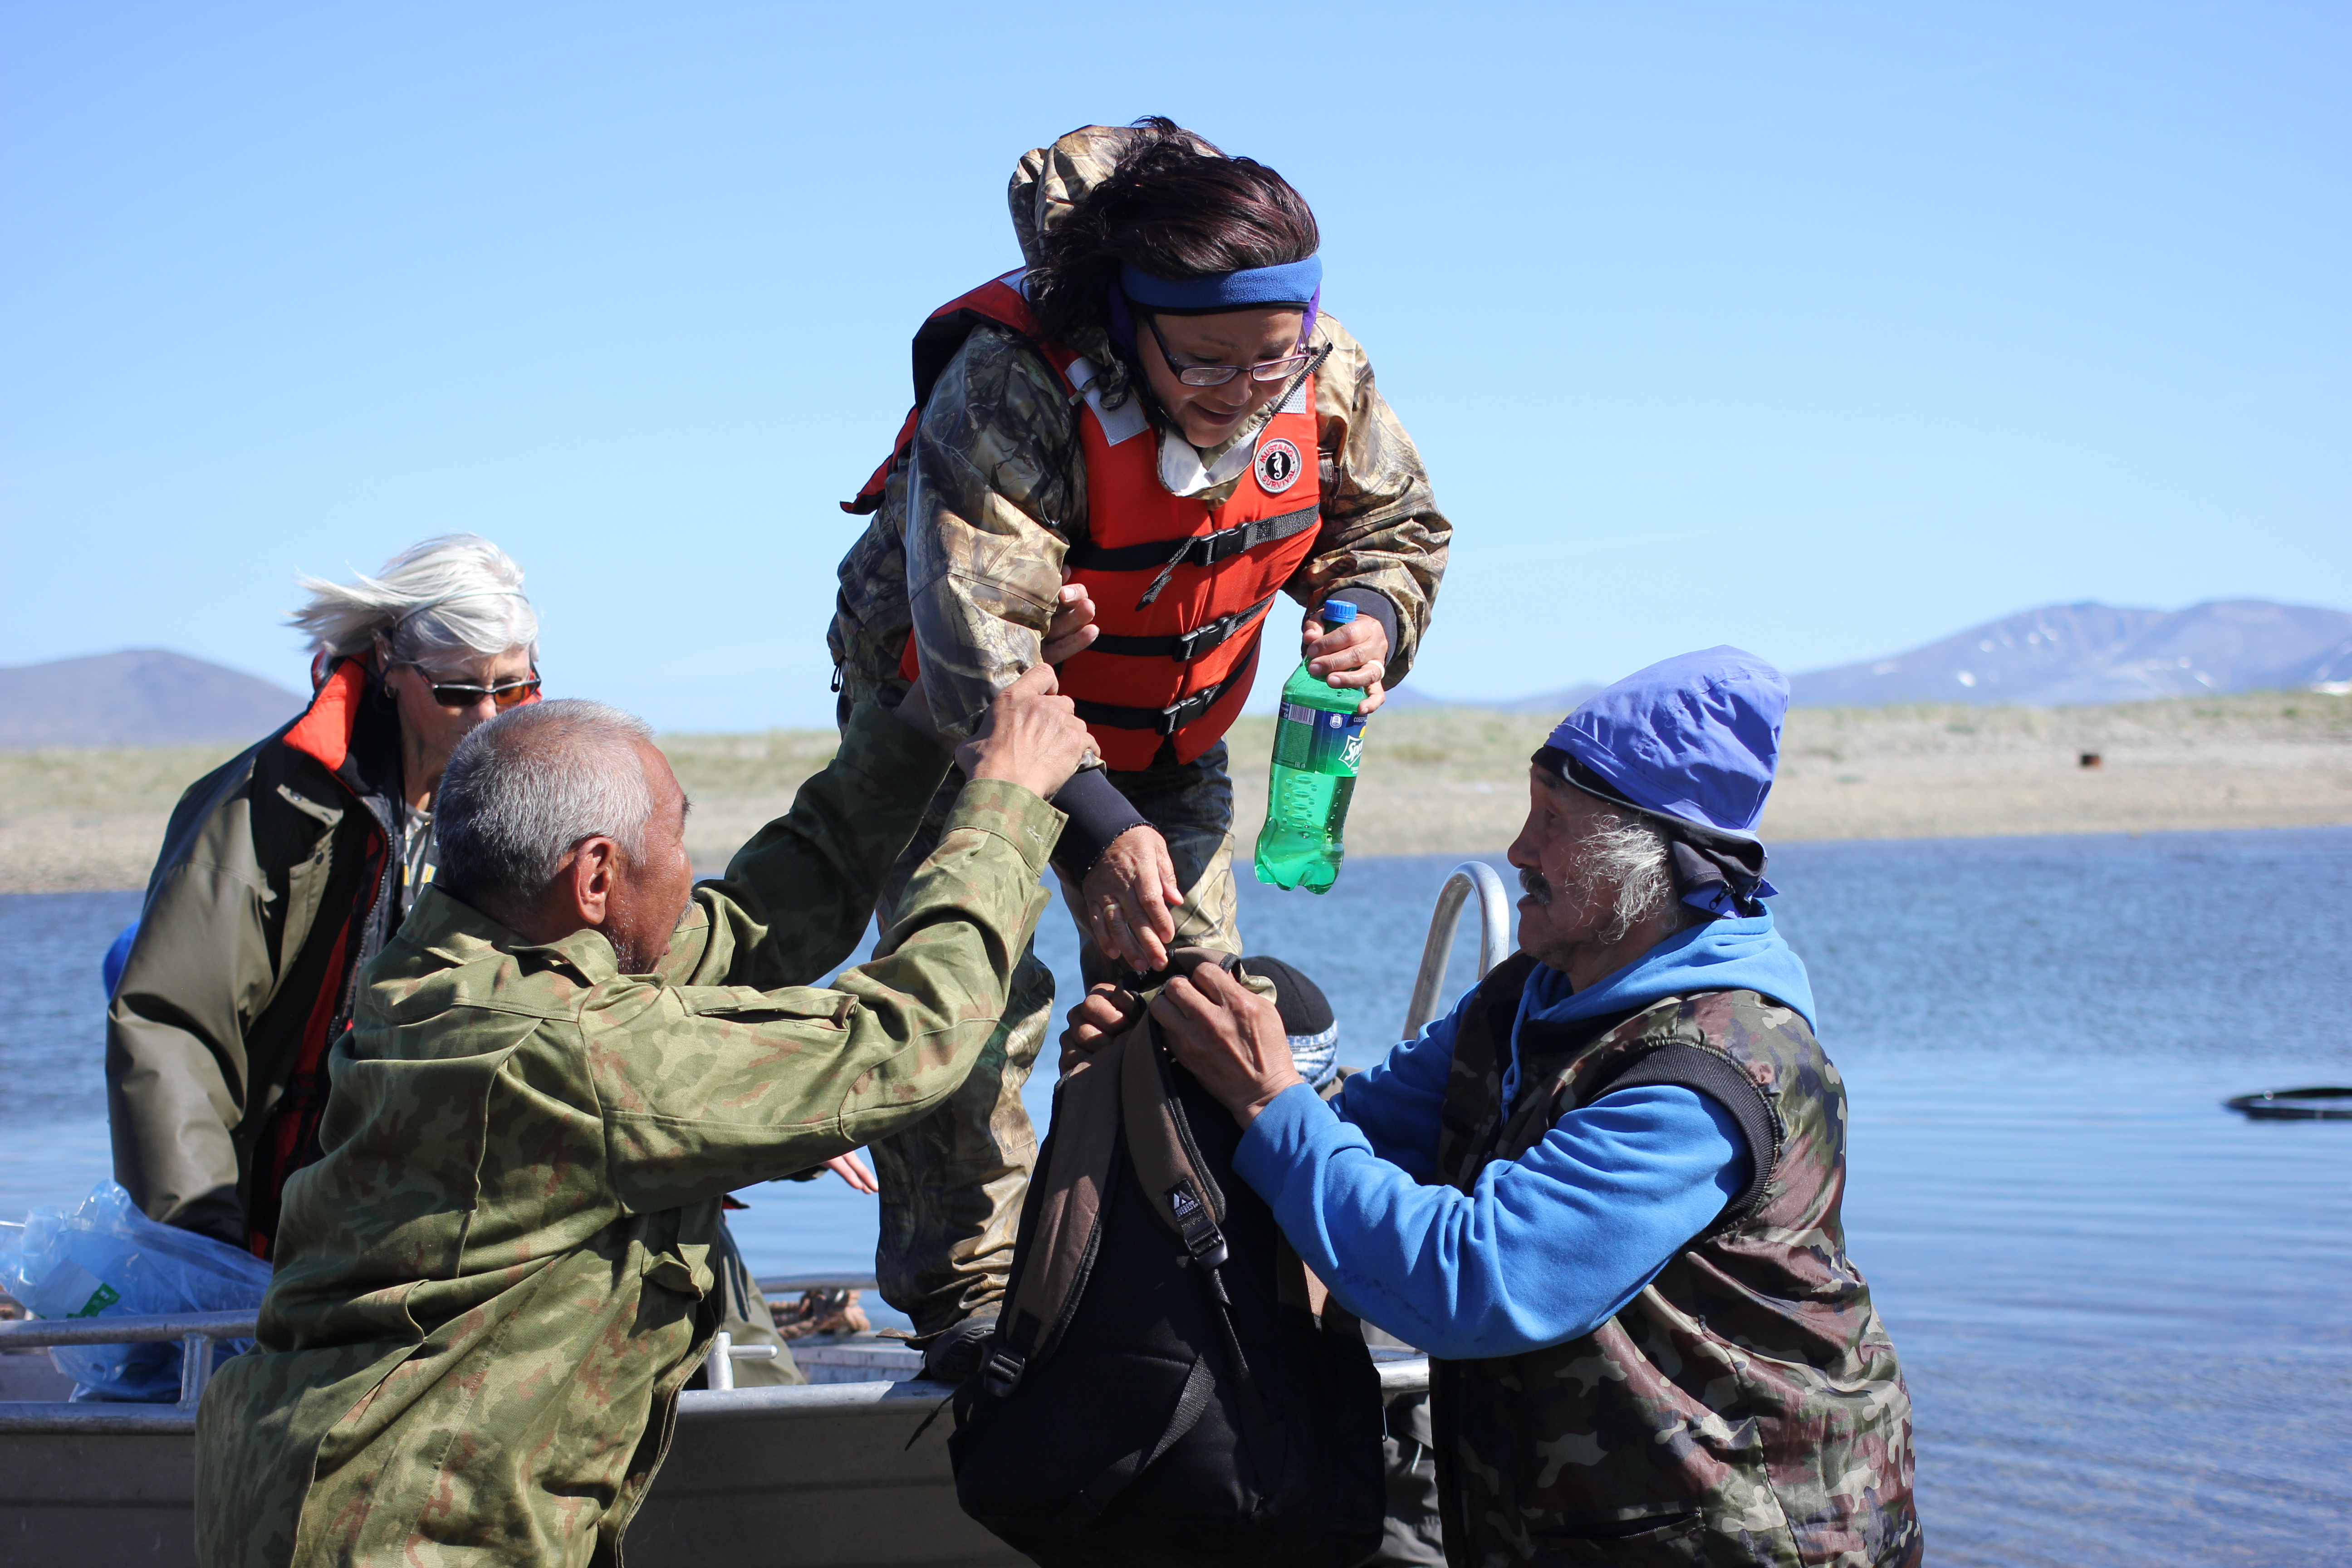 Chukchi men help Etta Tall disembark the boat at Senyavin Hot Springs, part of Chukotka’s Beringia National Park. The Diomede Island Family Reunion expedition relied on help from local hunters throughout the course of the July 2016 trip. (Kirsten Swann / Alaska Dispatch News)